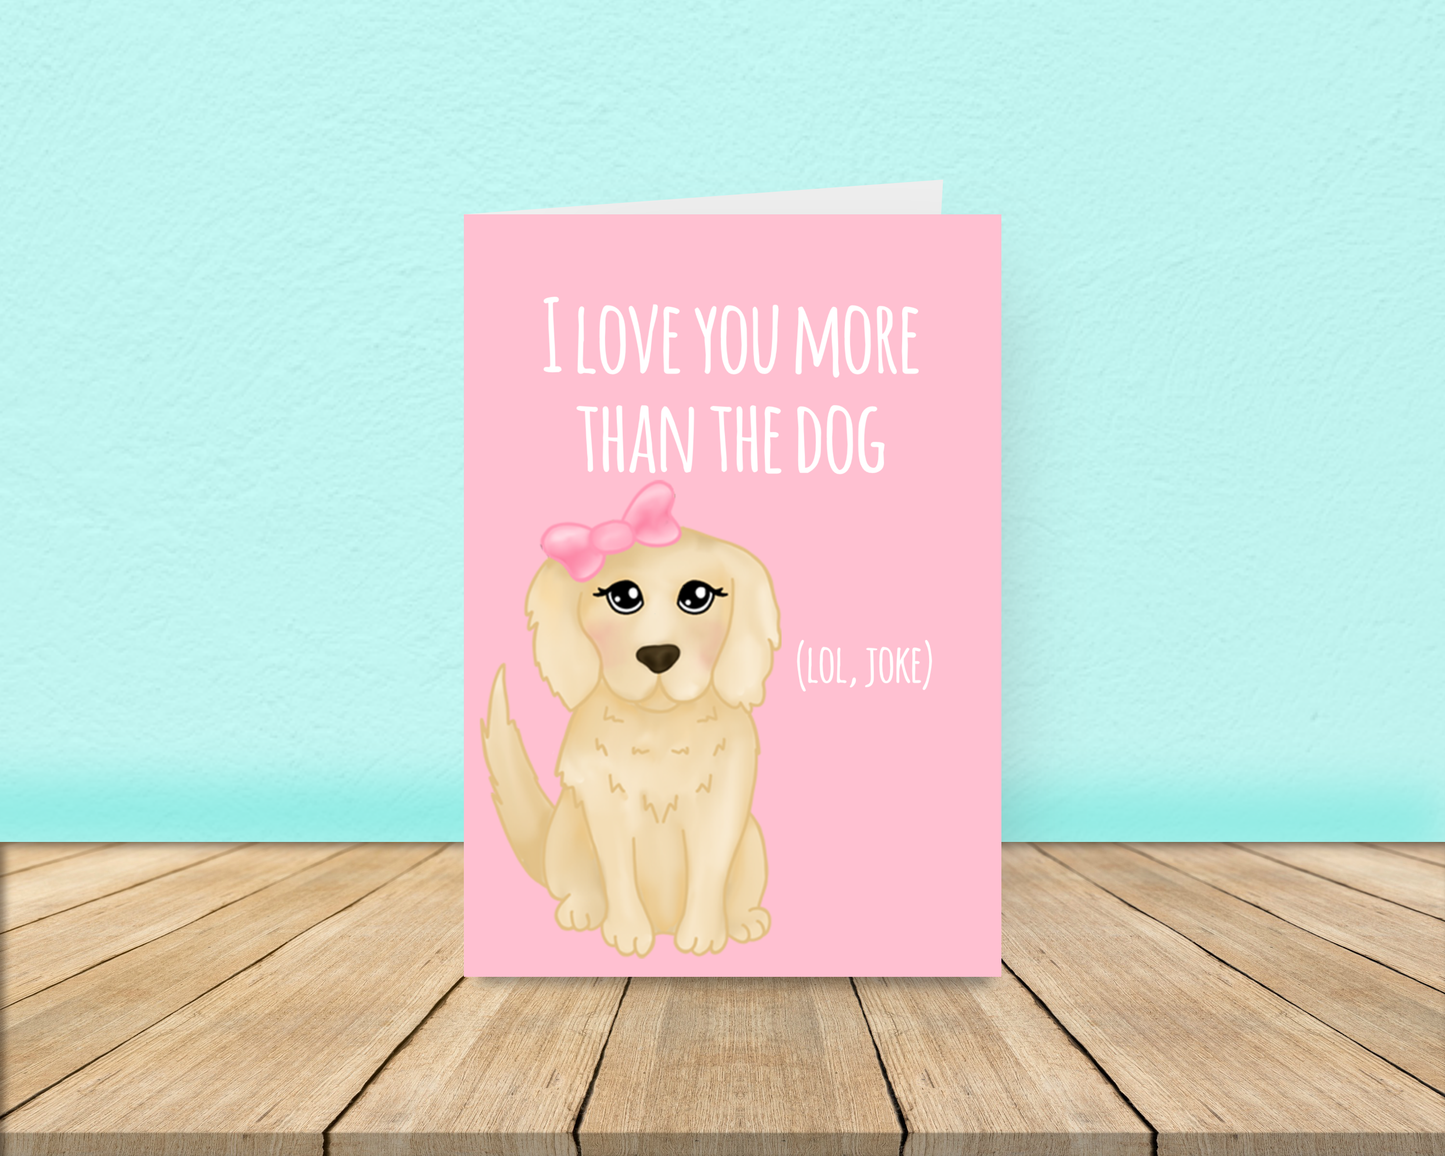 Love you more than the dog card - Golden Retiever